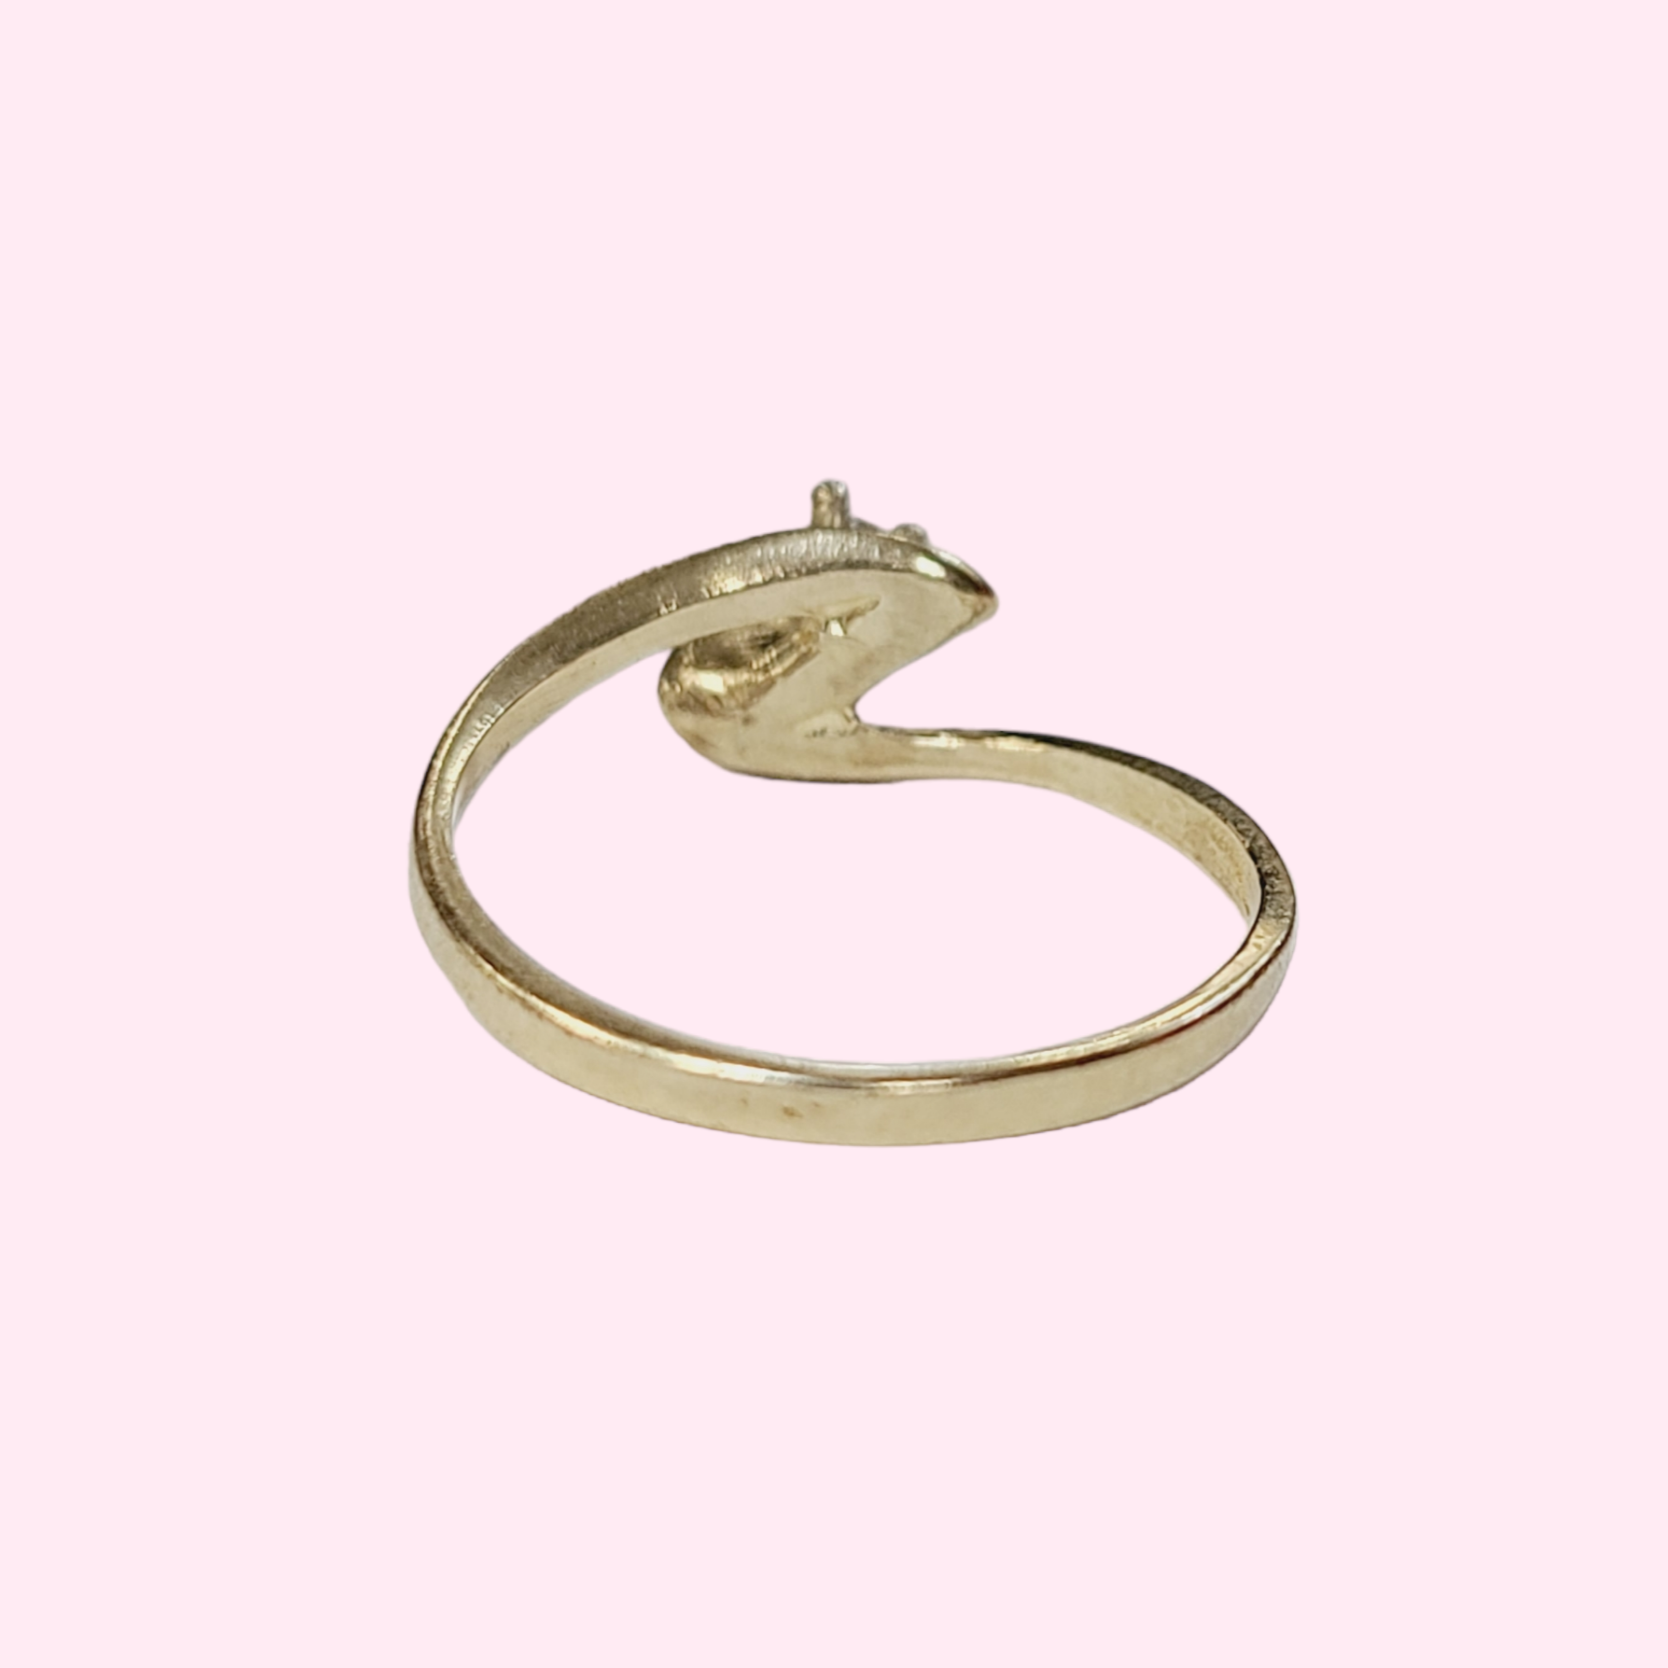 Solid 10K Yellow Gold Diamond Curved Ring Size 6.5